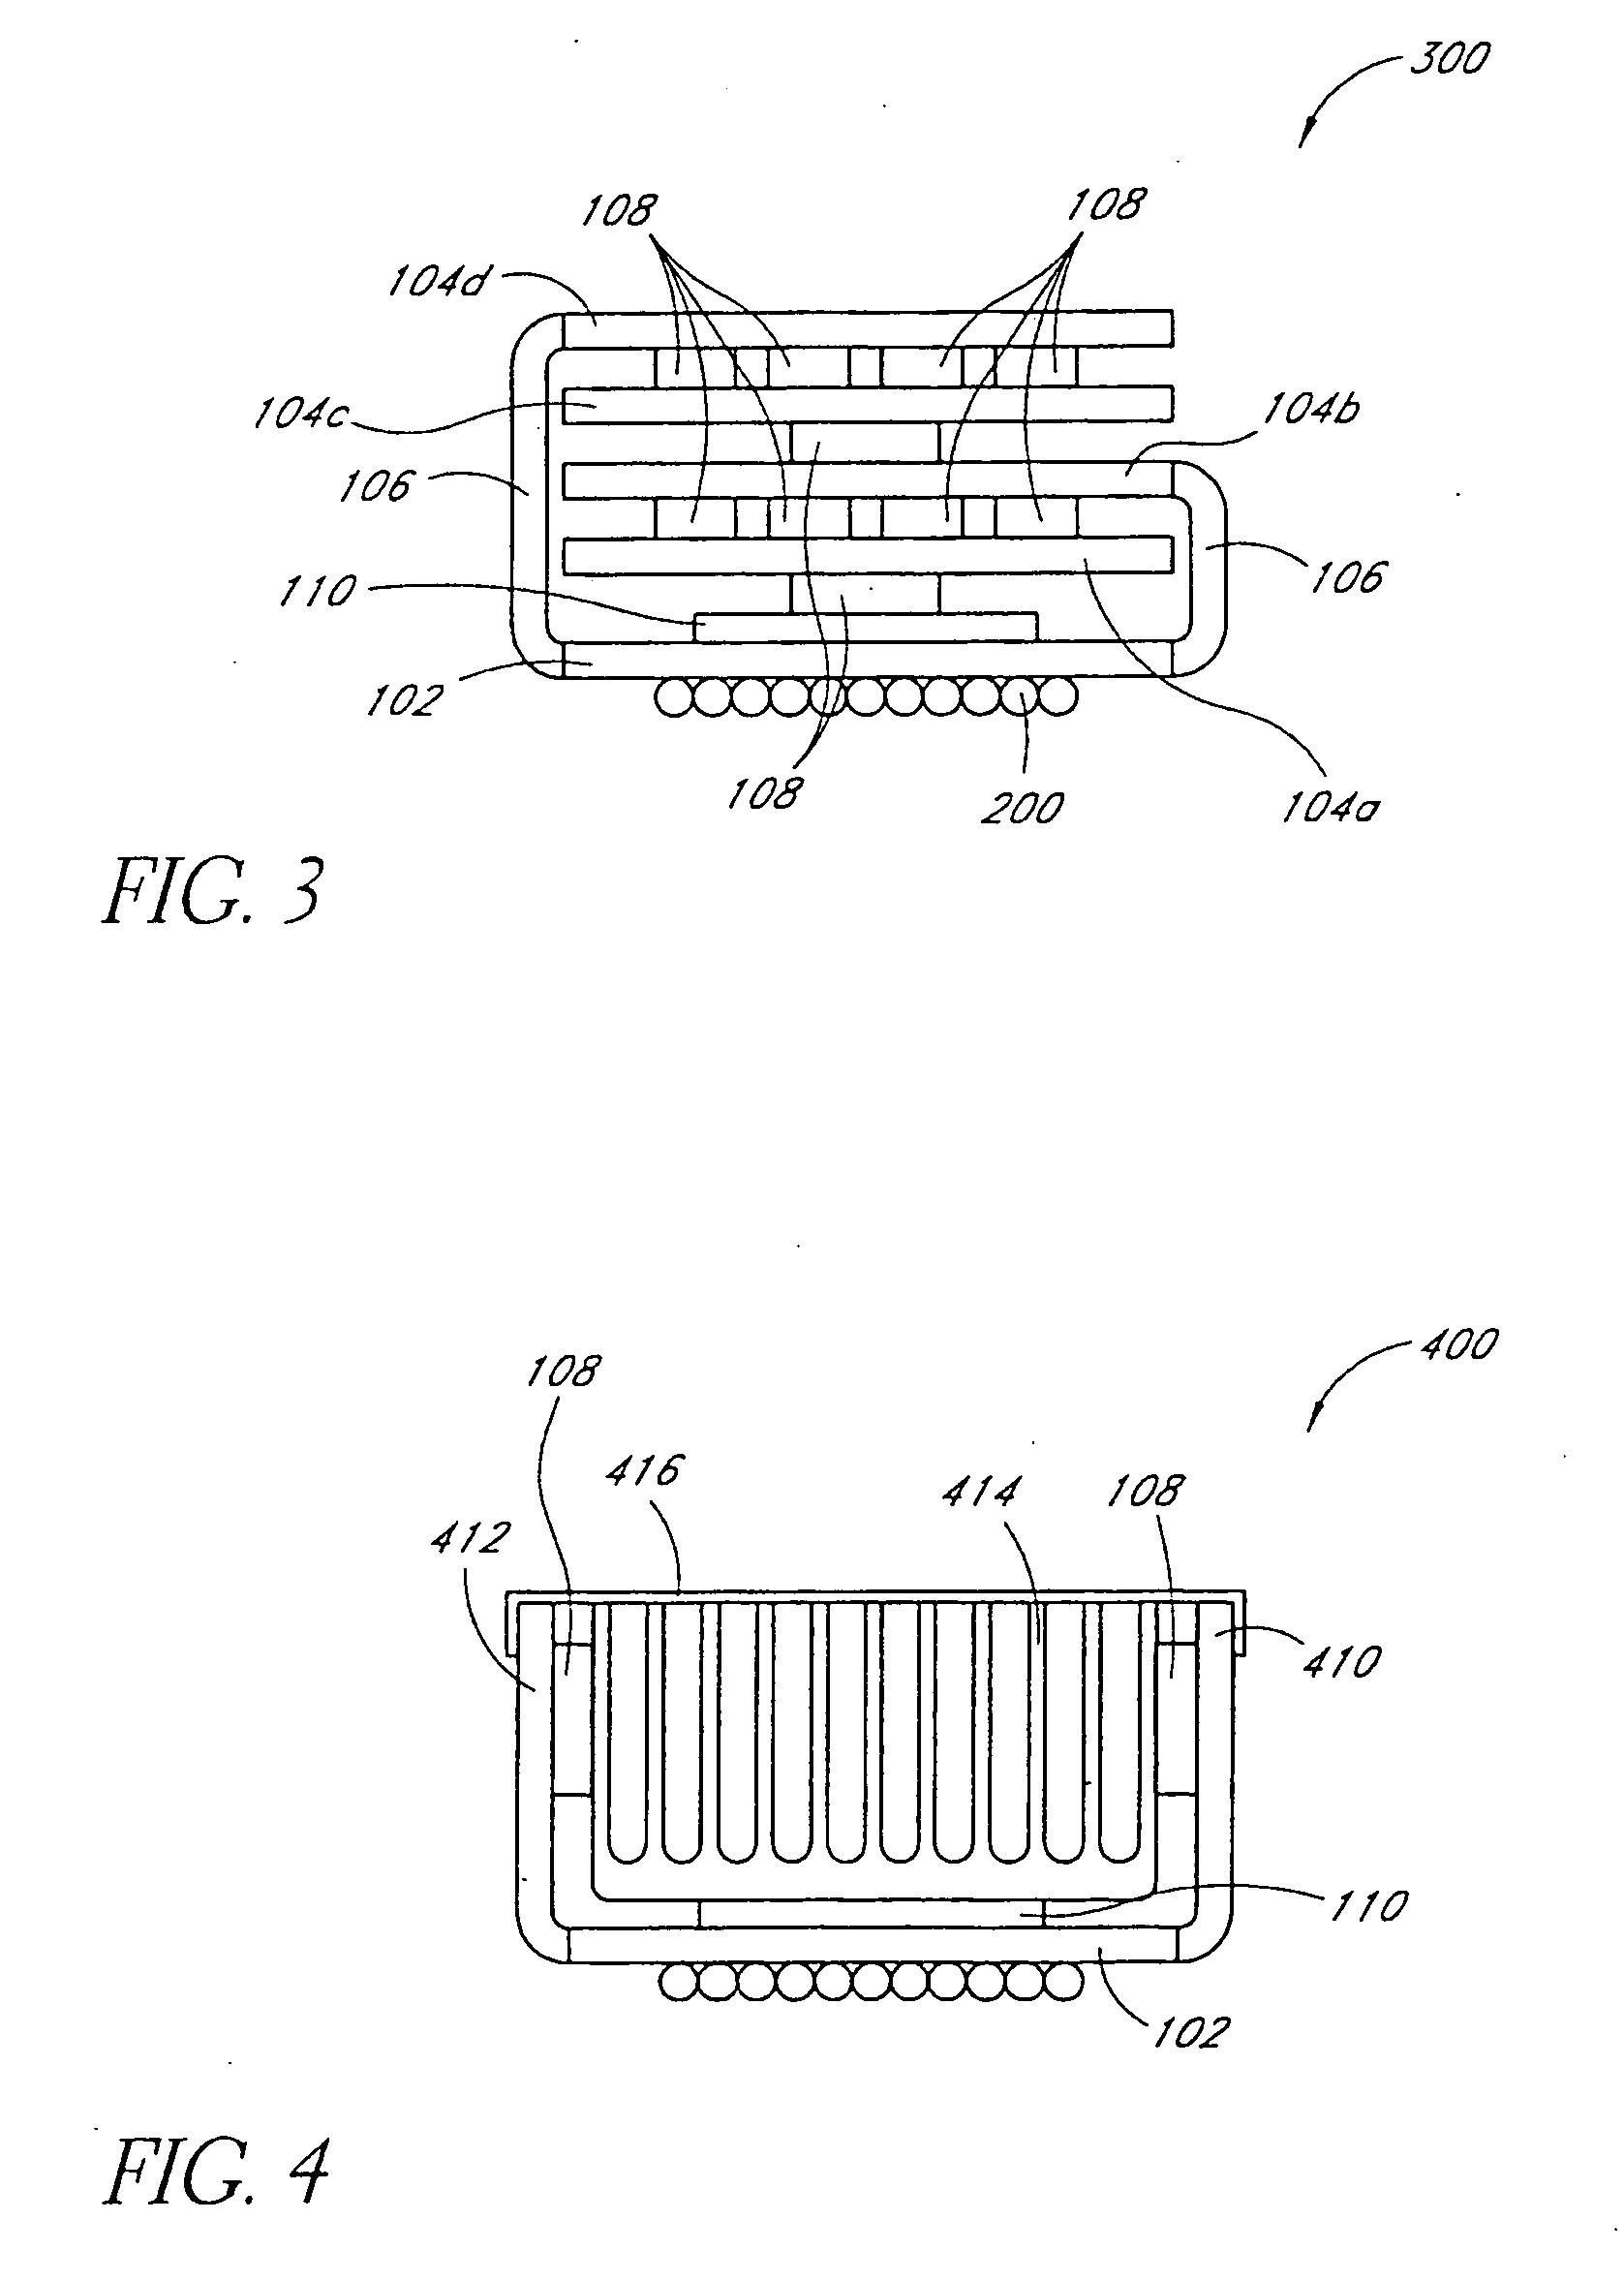 Processor/memory module with foldable substrate